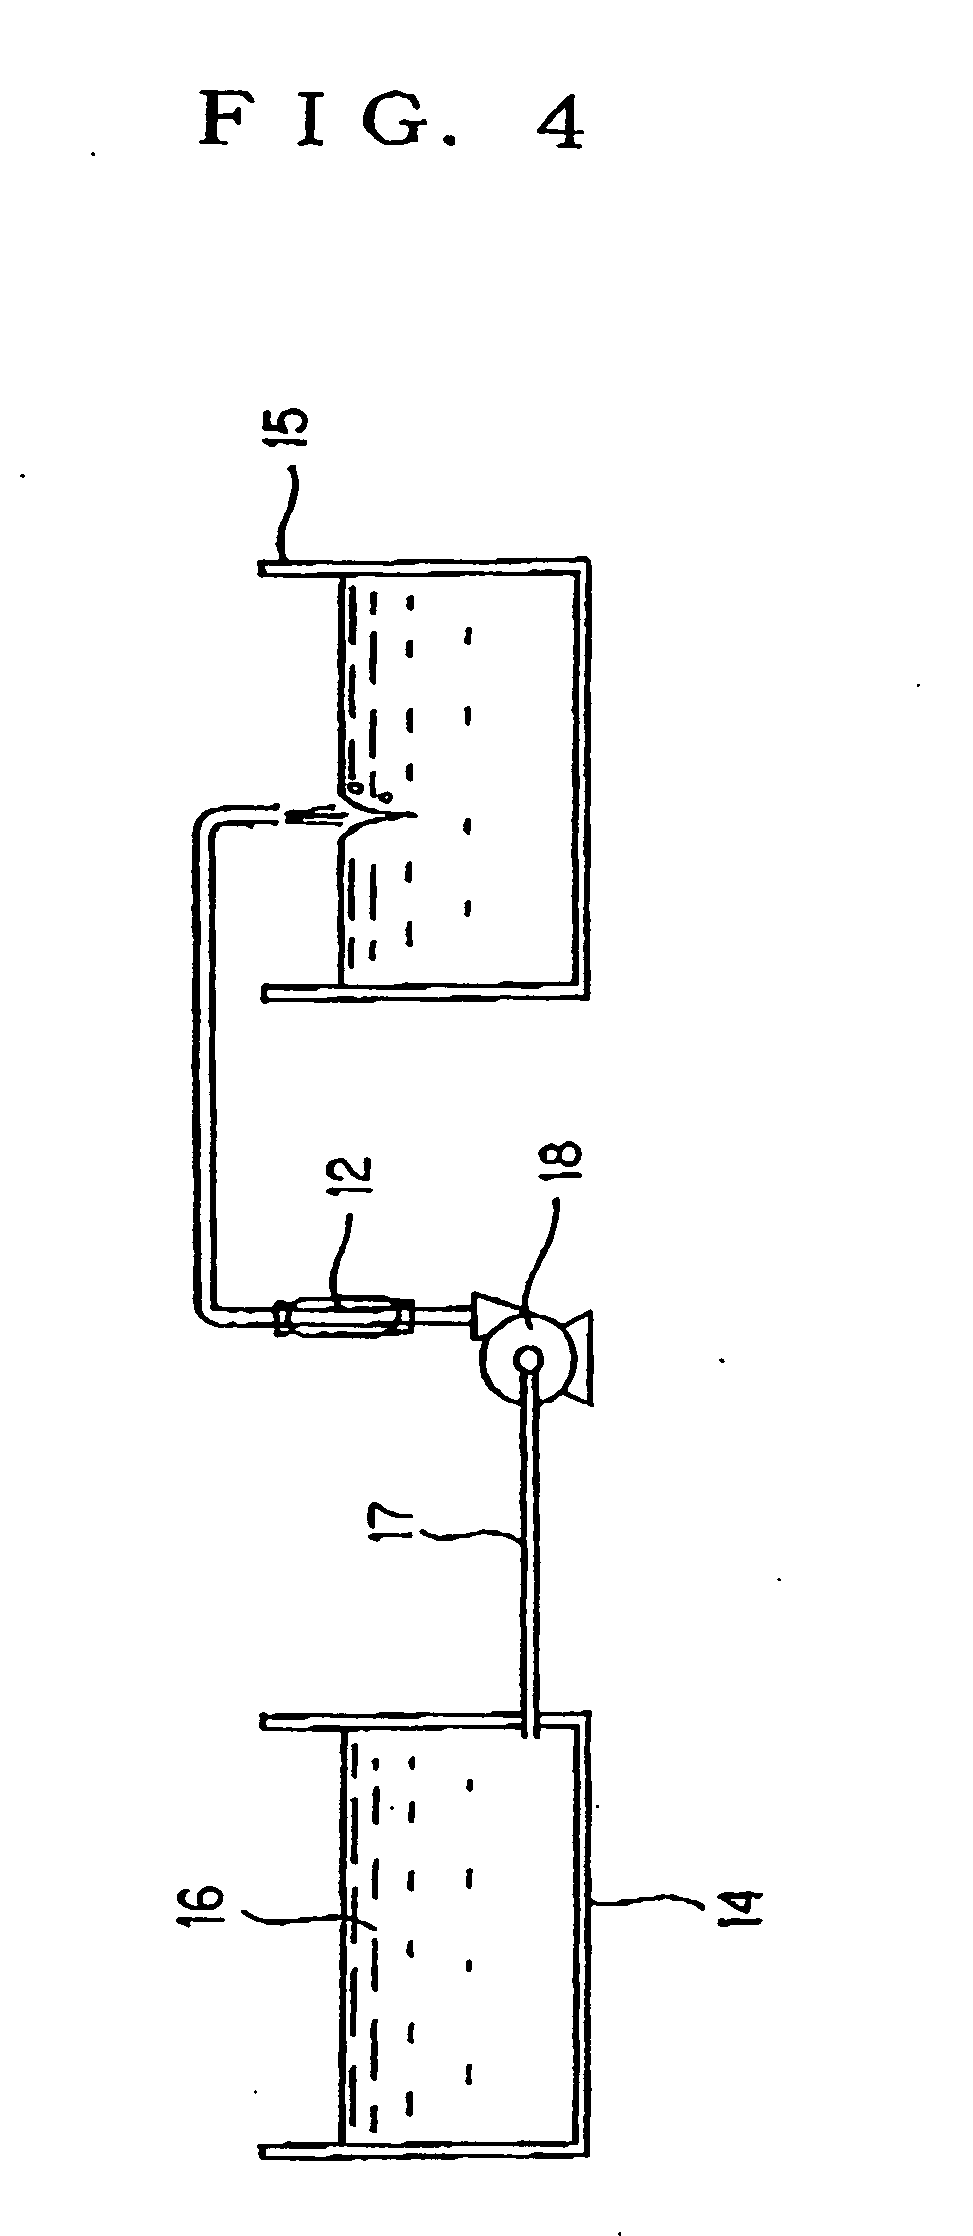 Method and apparatus for activating water